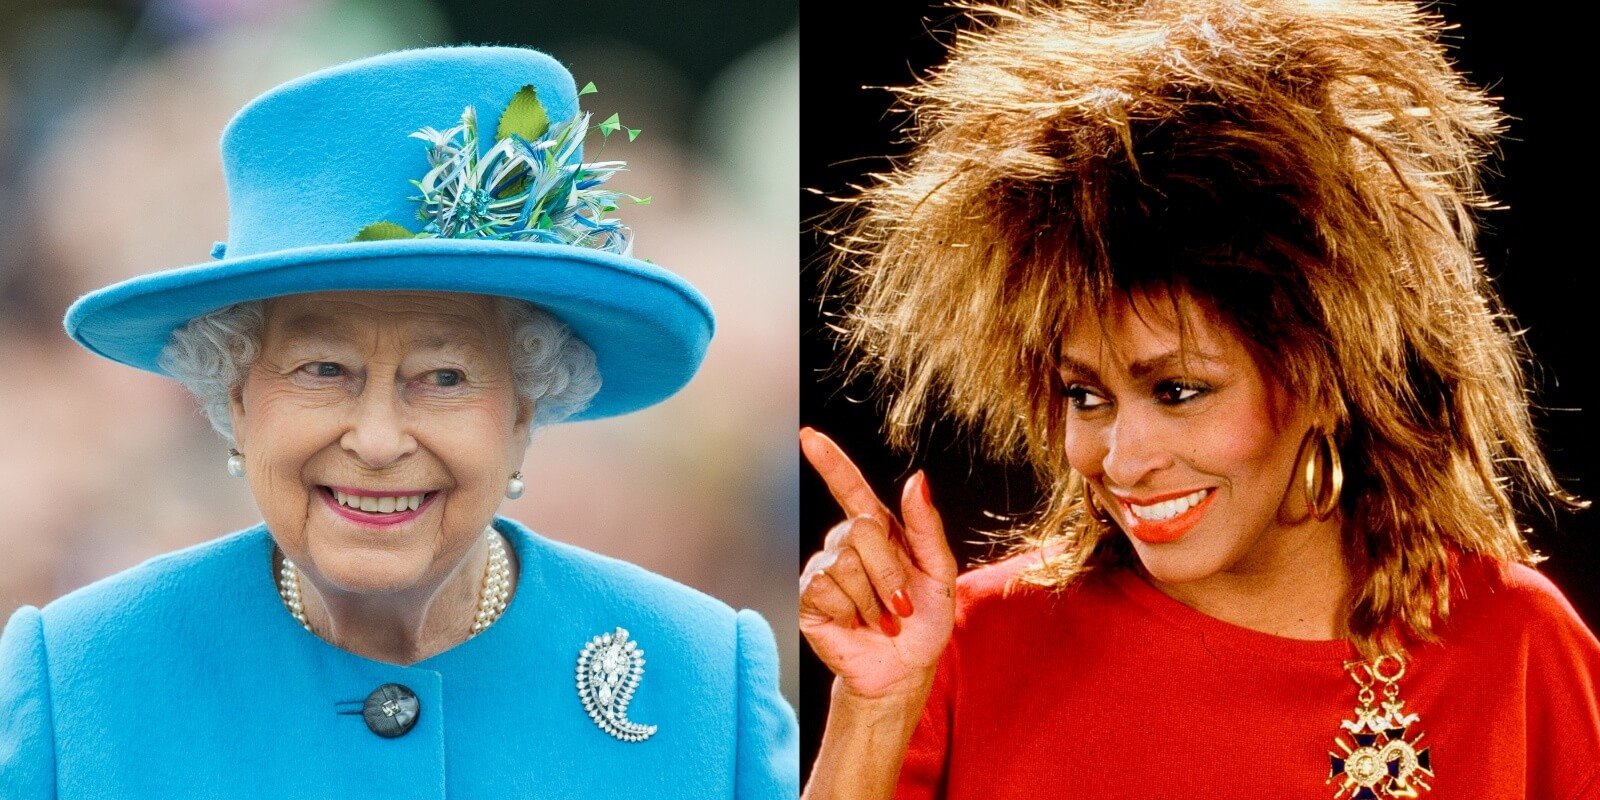 Queen Elizabeth and Tina Turner in side-by-side photographs.